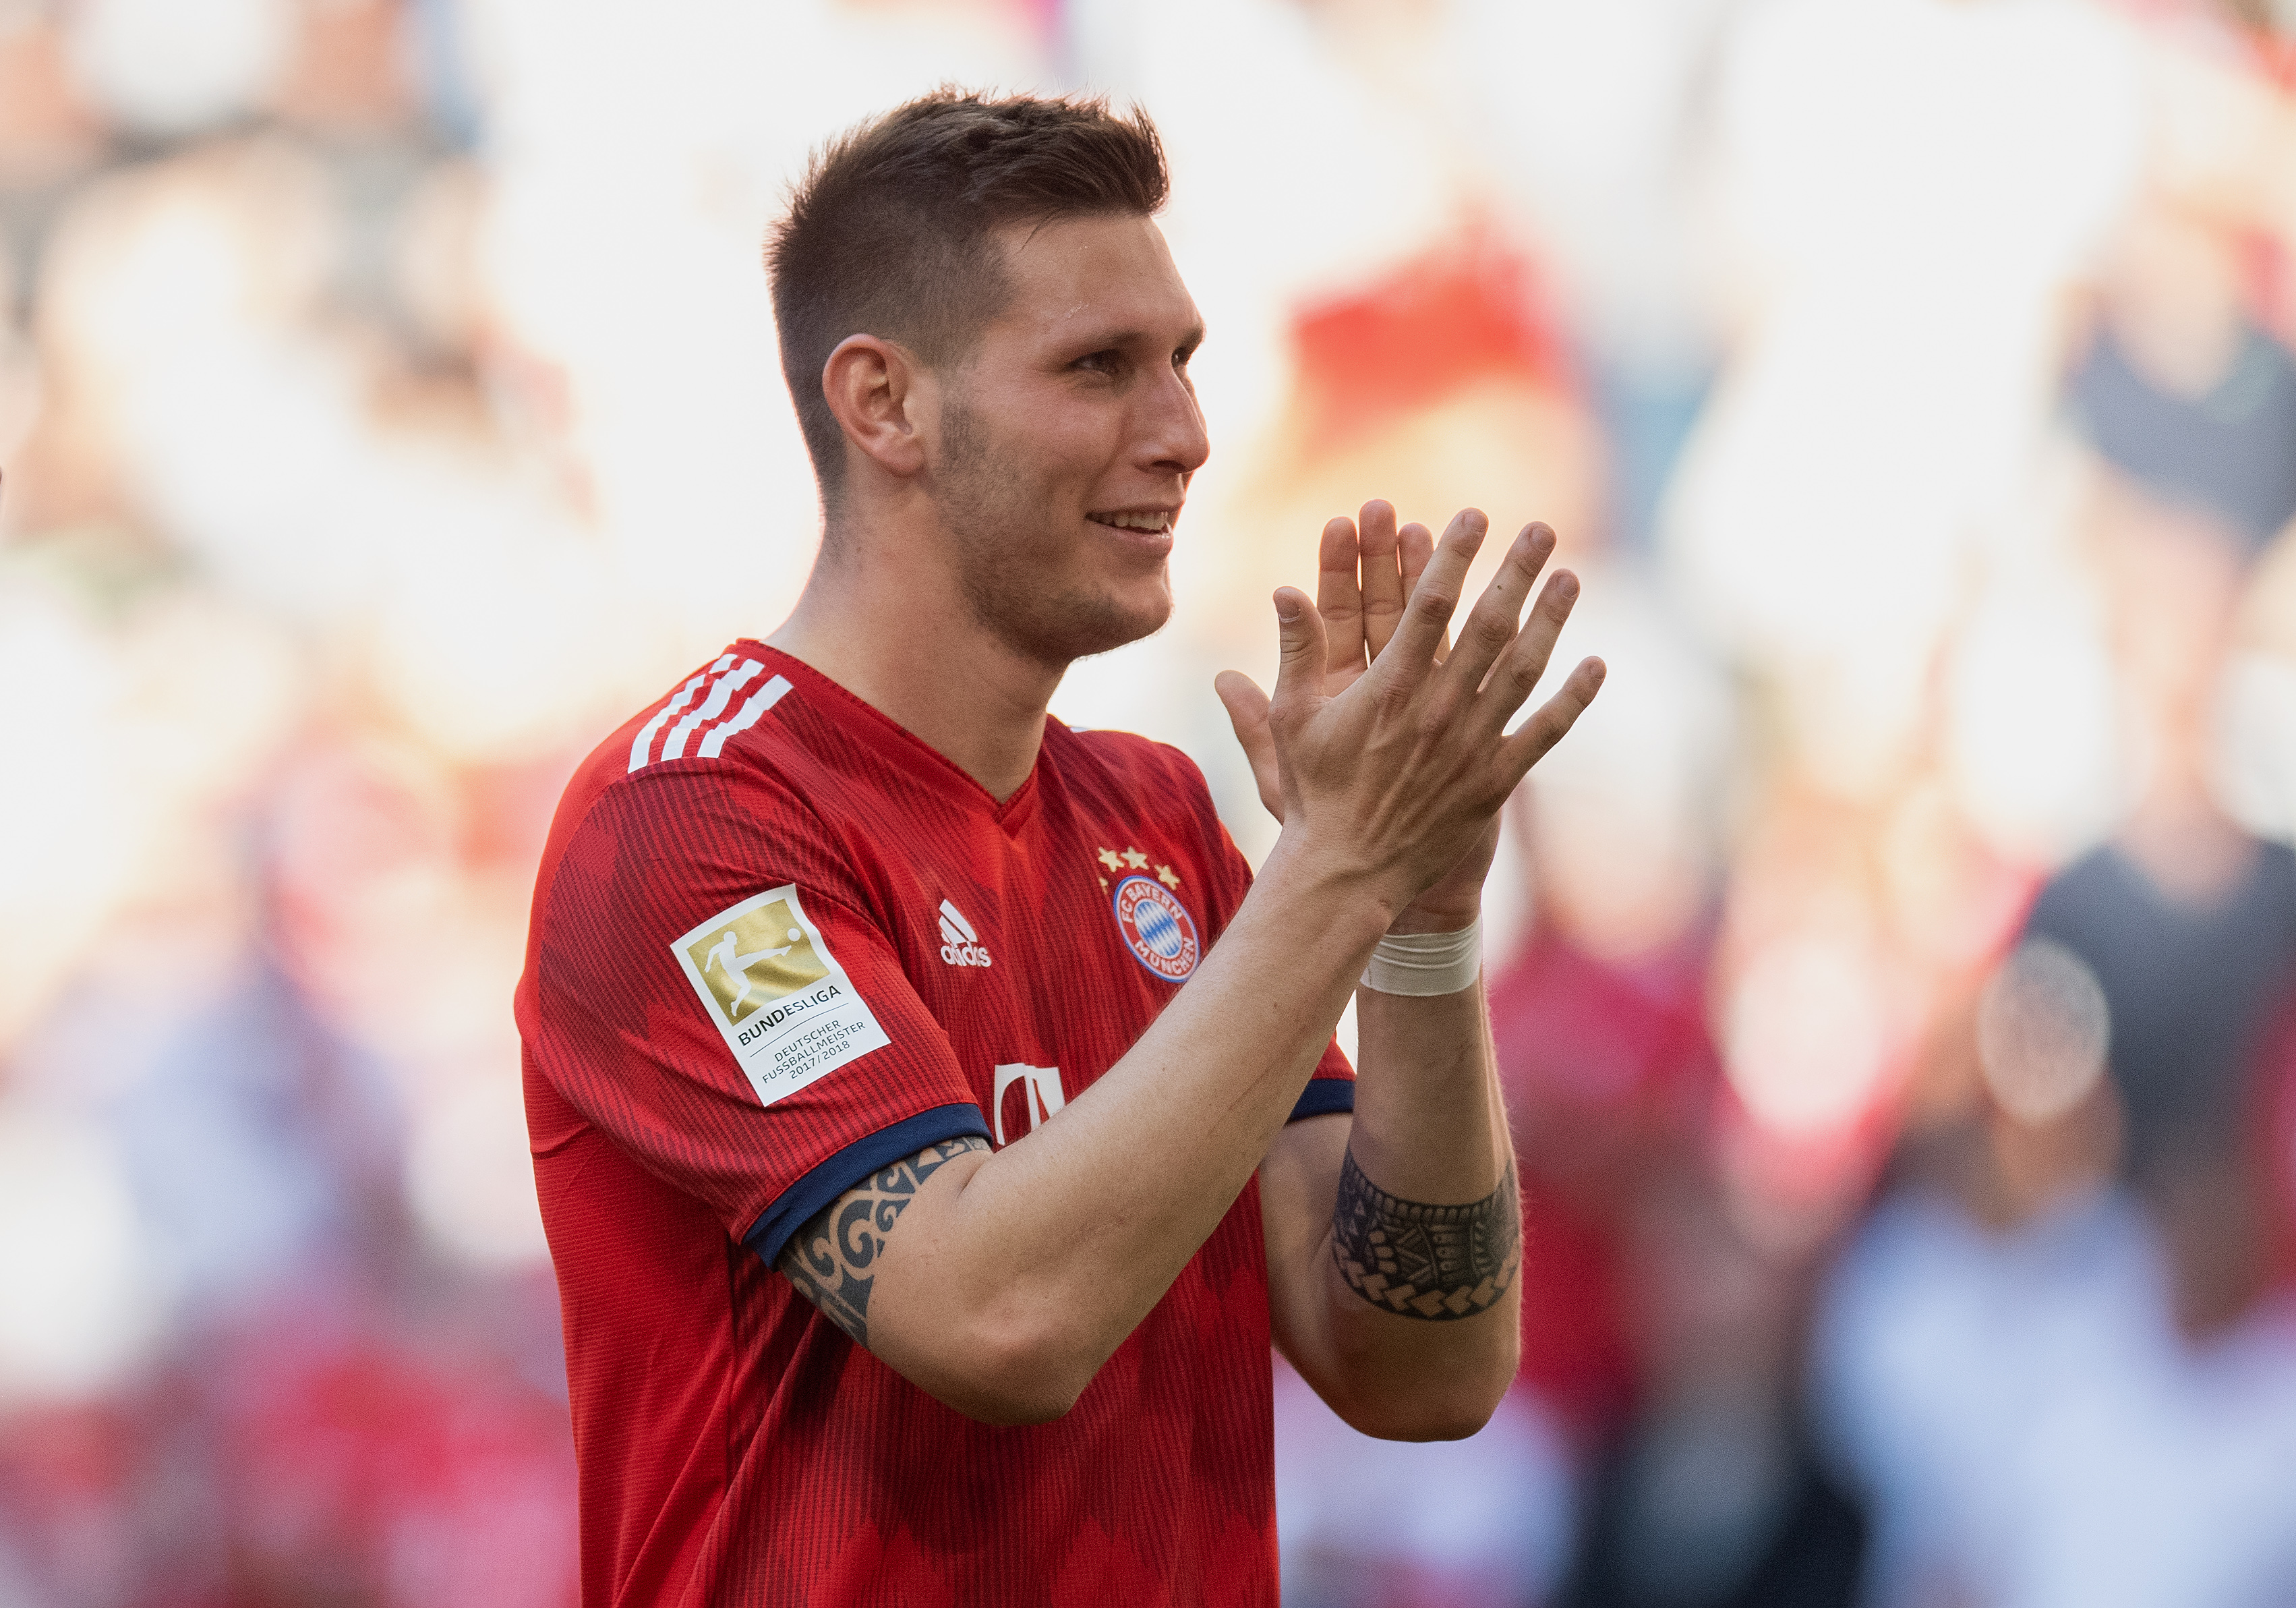 MUNICH, GERMANY - APRIL 20: Niklas Suele of FC Bayern Muenchen applauds the fans after the Bundesliga match between FC Bayern Muenchen and SV Werder Bremen at Allianz Arena on April 20, 2019 in Munich, Germany. (Photo by Matthias Hangst/Bongarts/Getty Images)